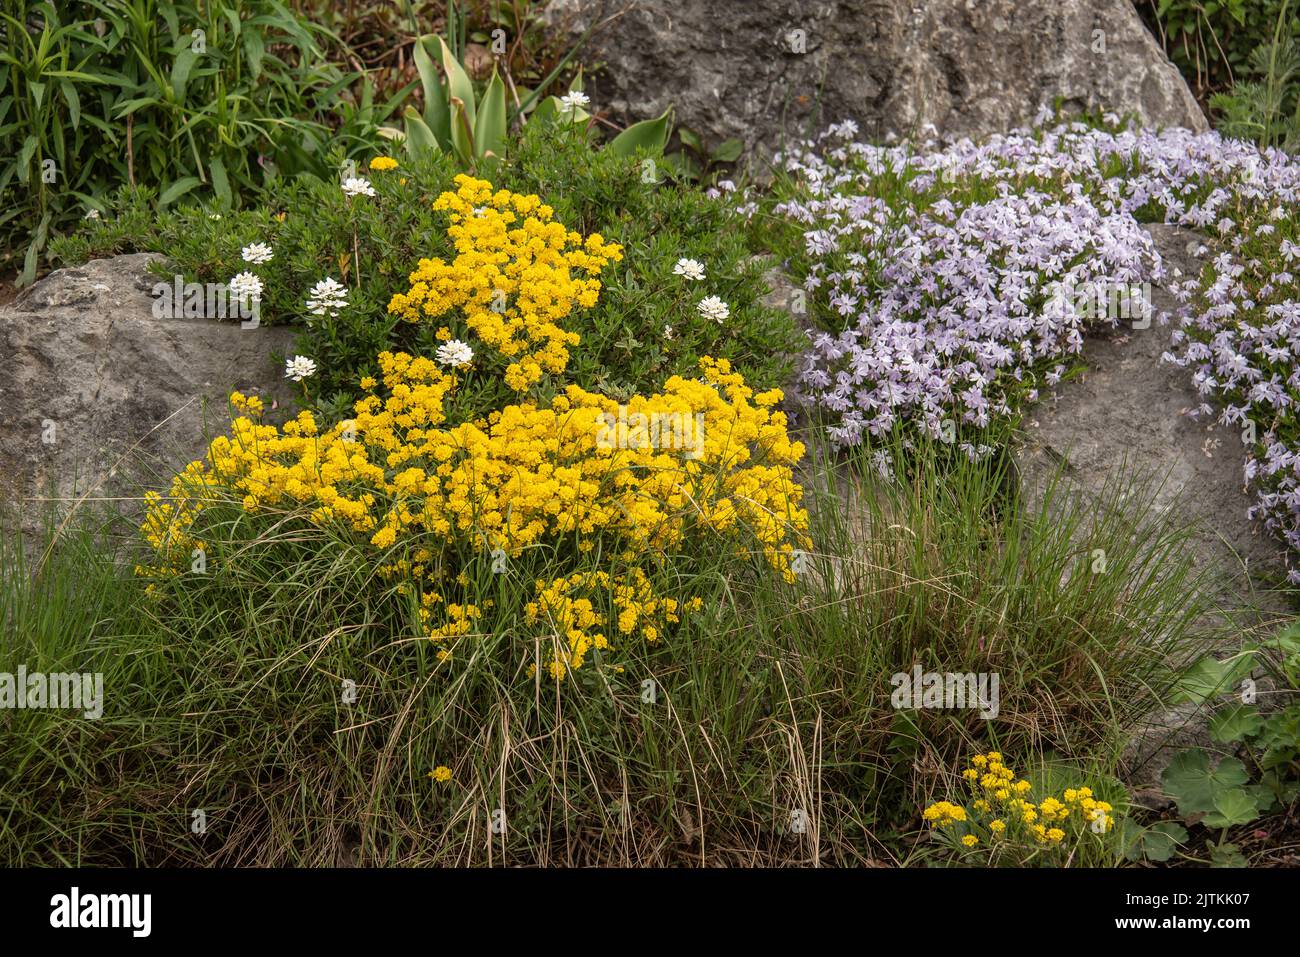 a rock garden with limestone boulders grown with golden alison and creeping phlox in cascades Stock Photo